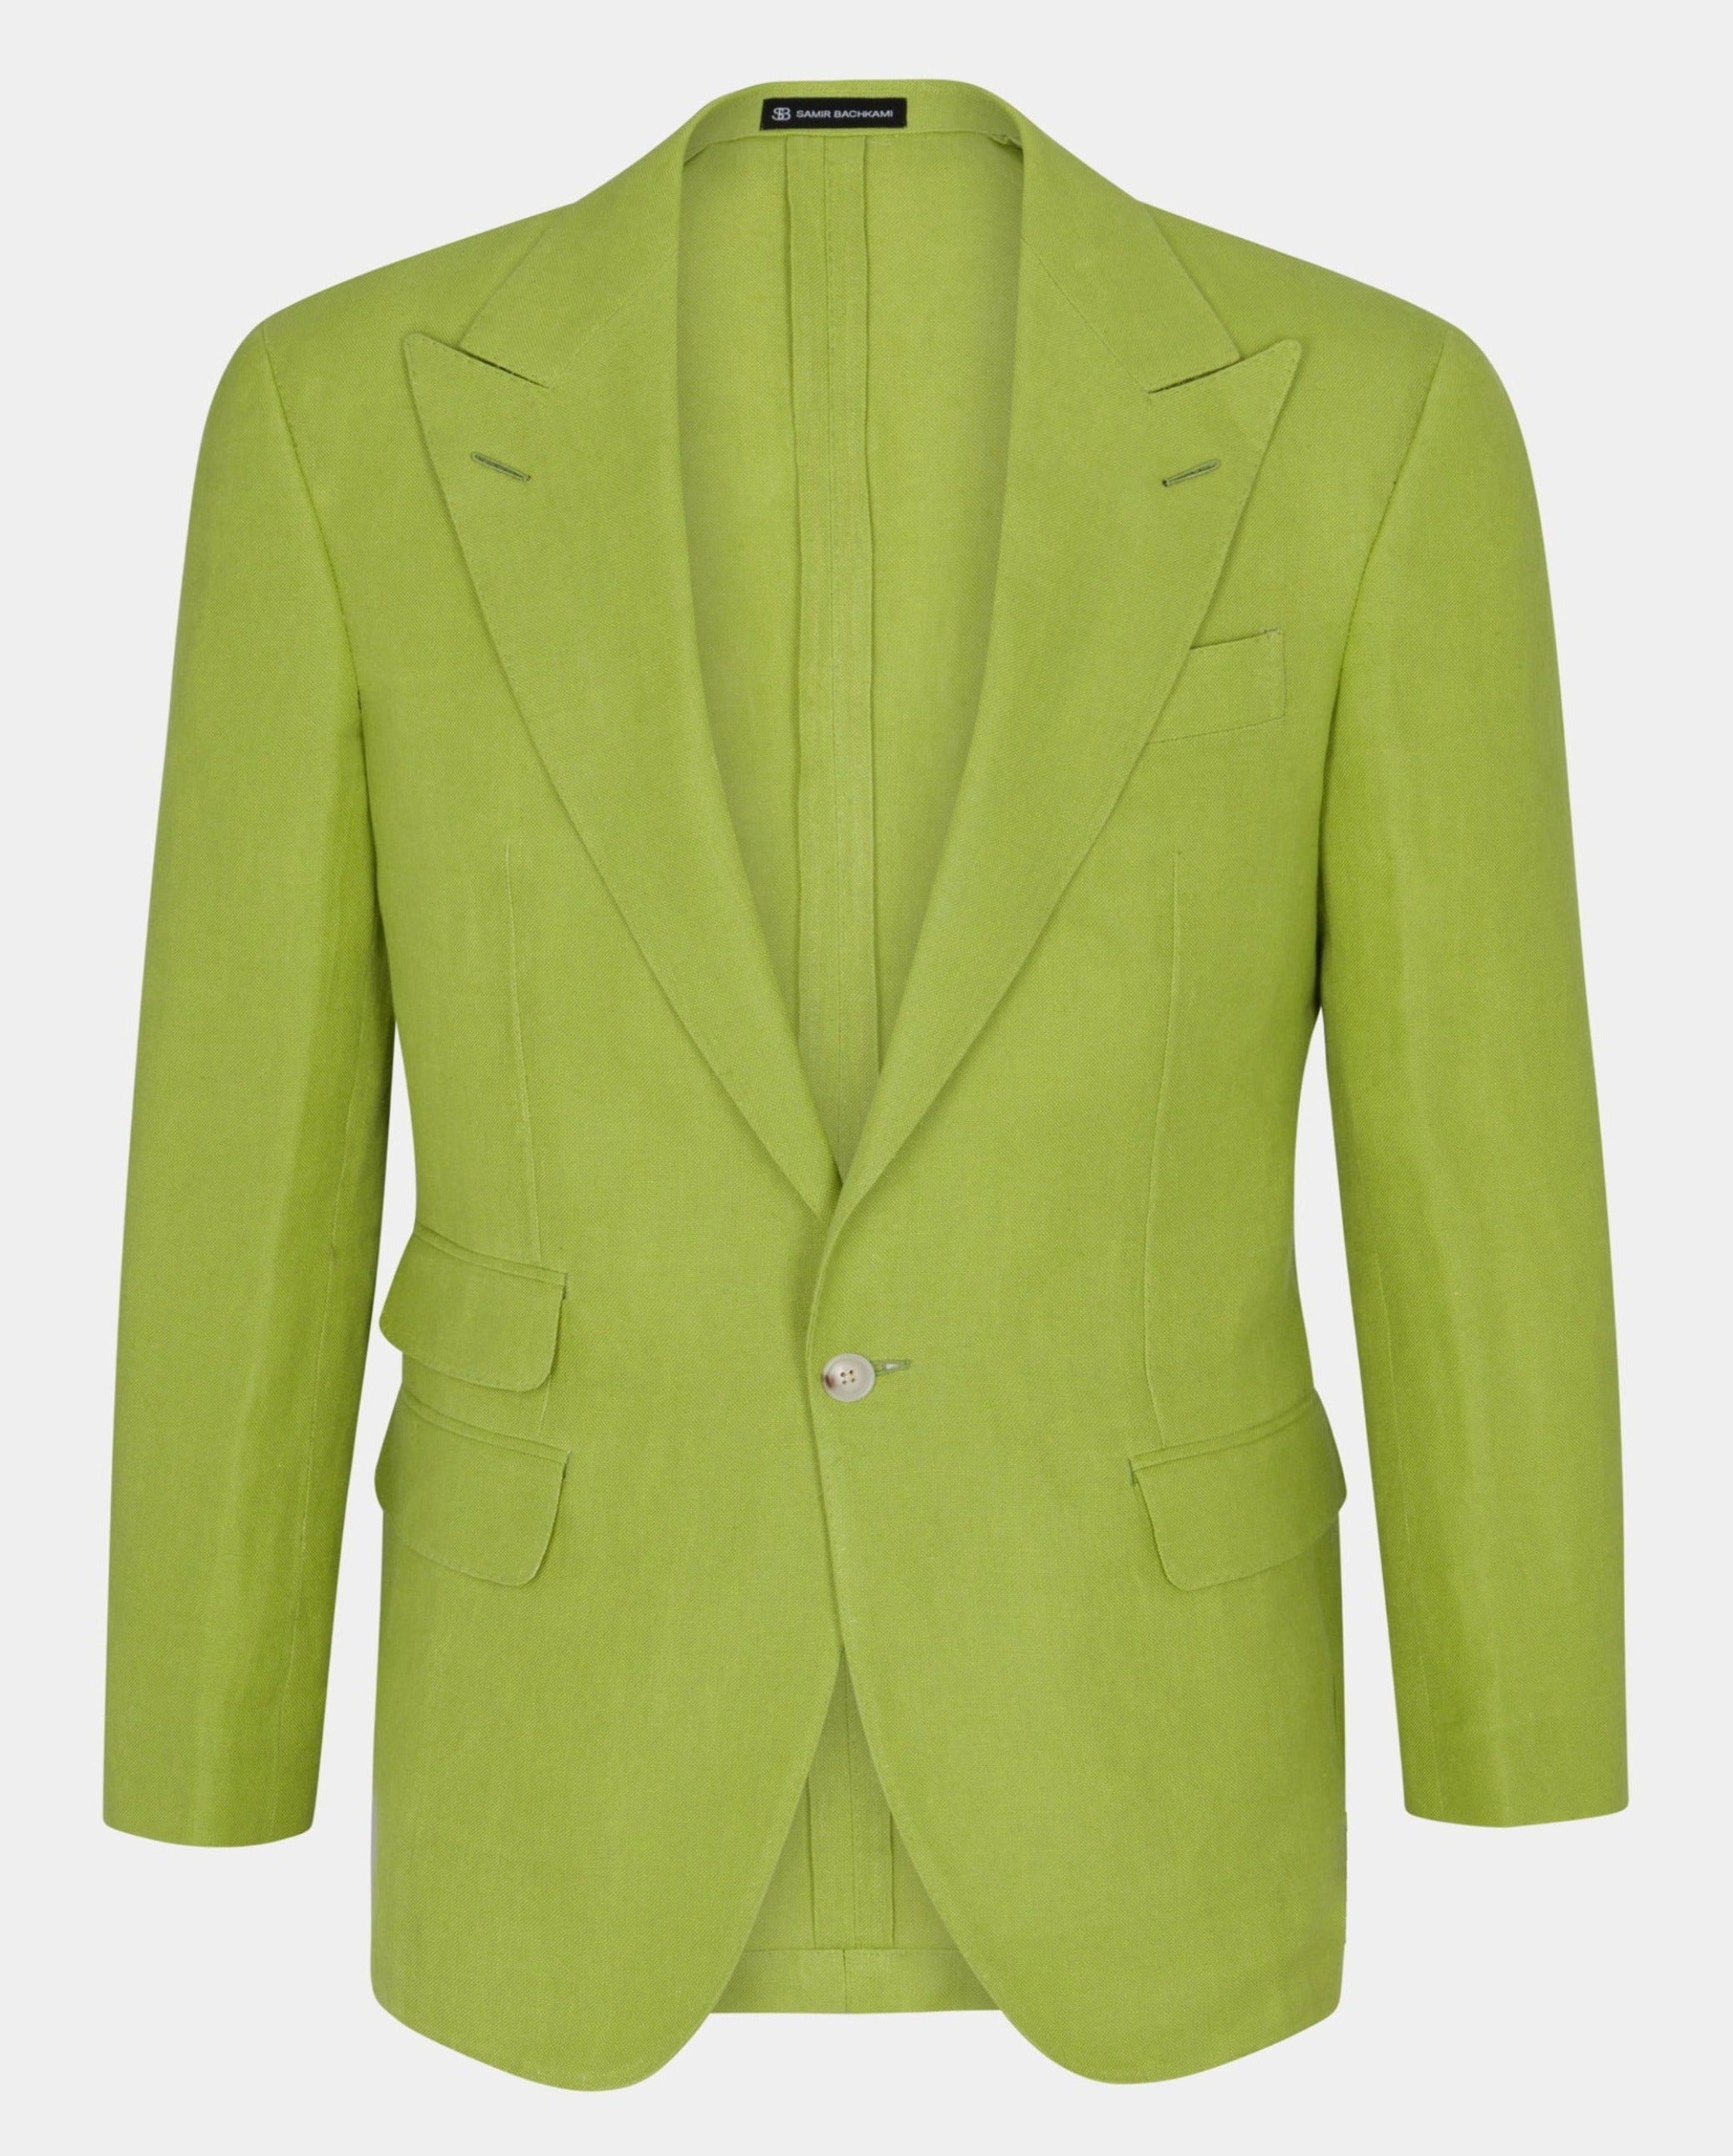 Green Lime Linen Single Breasted Suit - Samir Bachkami